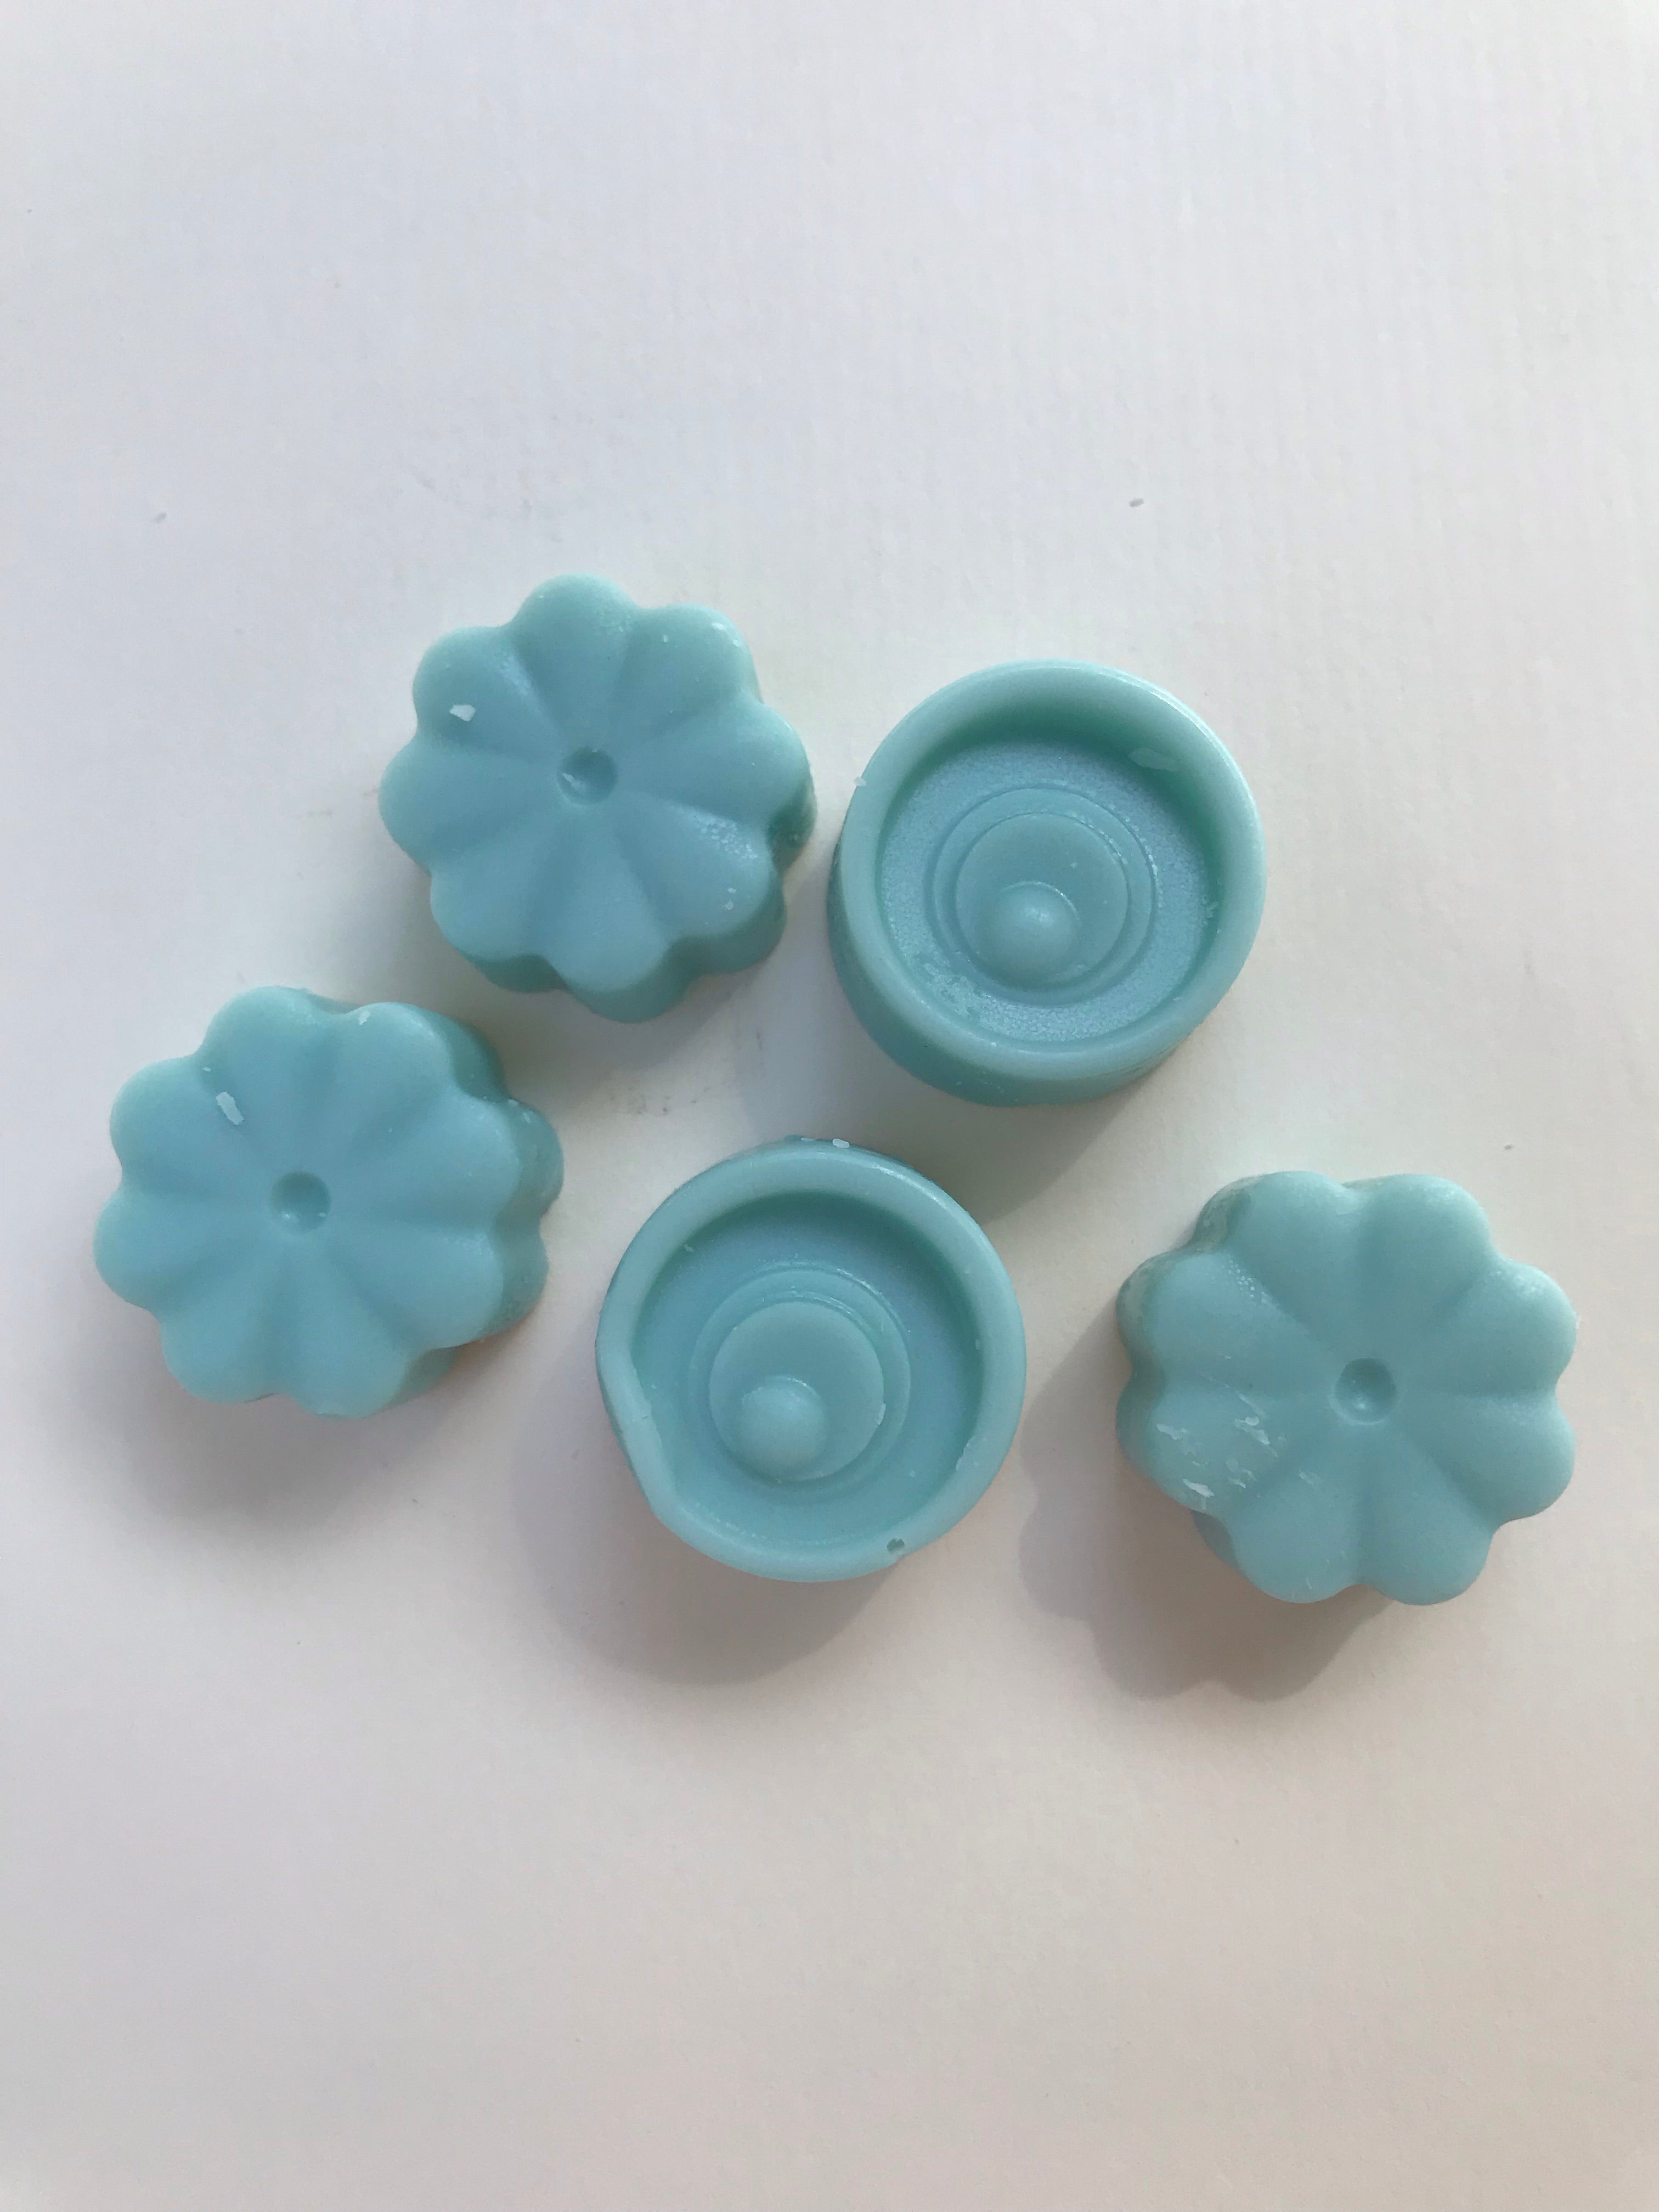 5 Fragranced Soy Wax Melts - Scented Soy Wax Melts | Wax Melt Warmers - MadisonMelts